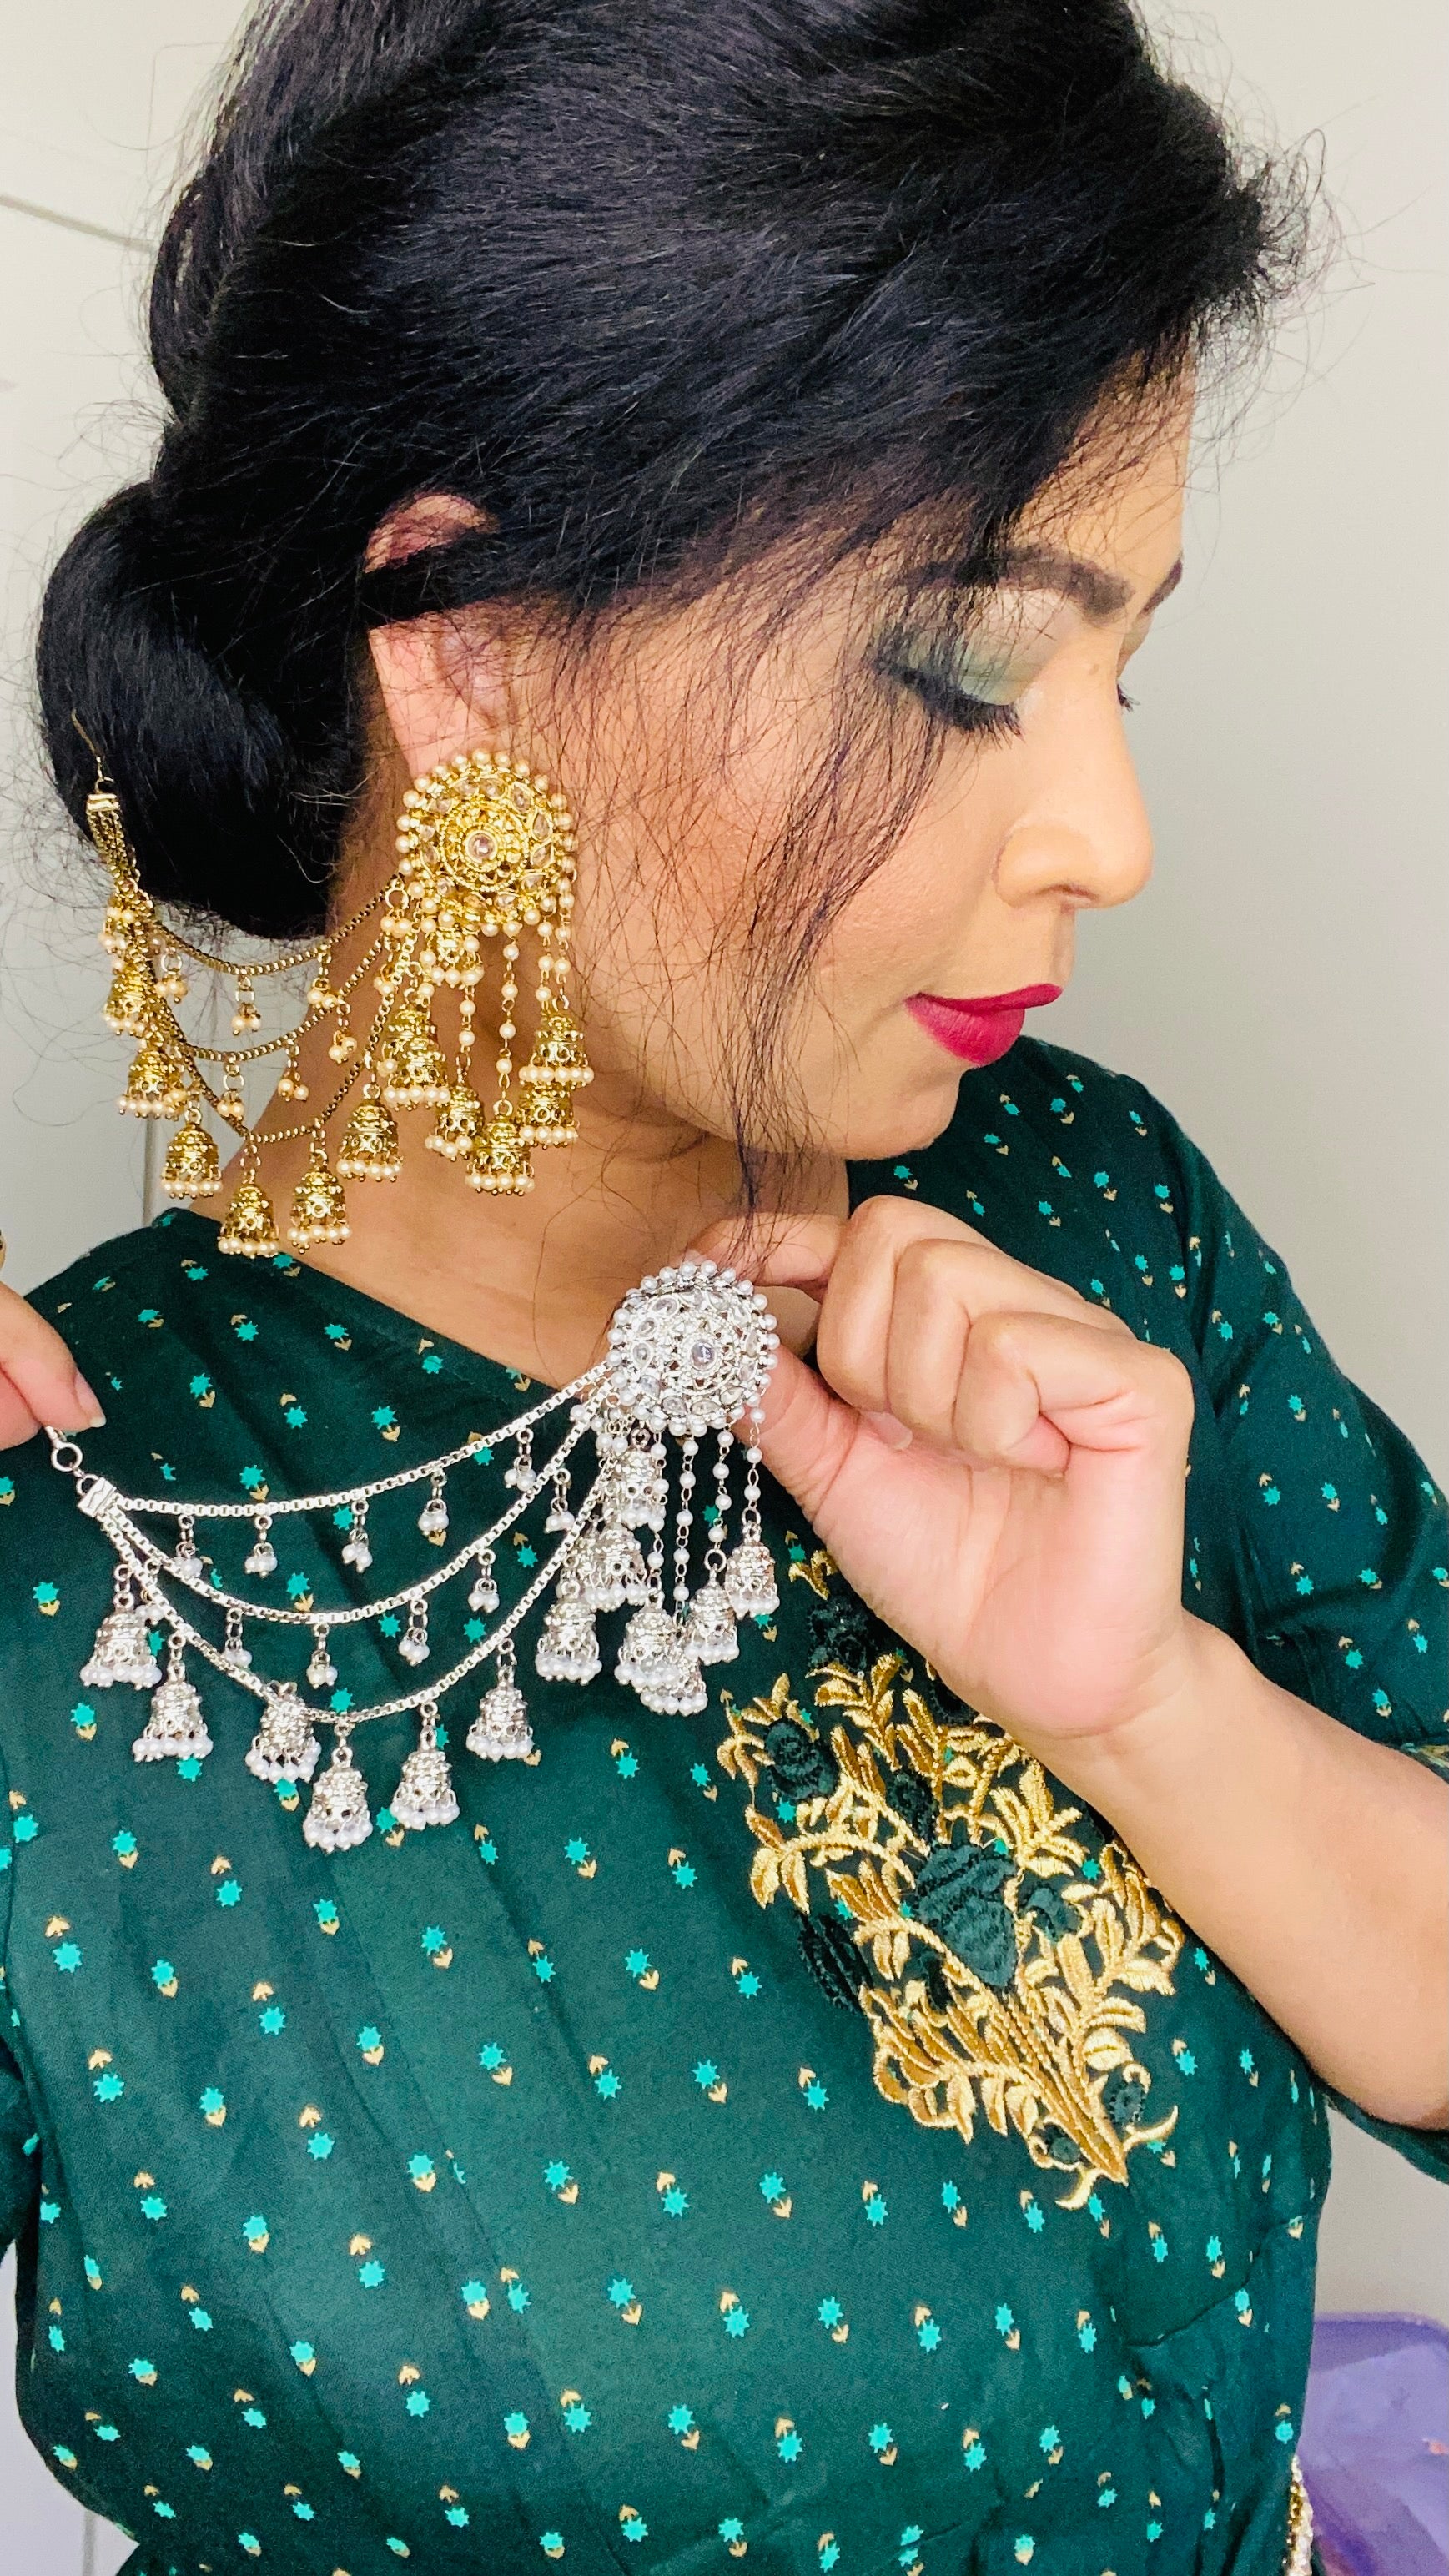 Buy Polki Ear Chain, Sahare, Earrings Support Chain, Gold Kaan Chain,  Indian, Pakistani Jewelry, Hair Accessories Online in India - Etsy